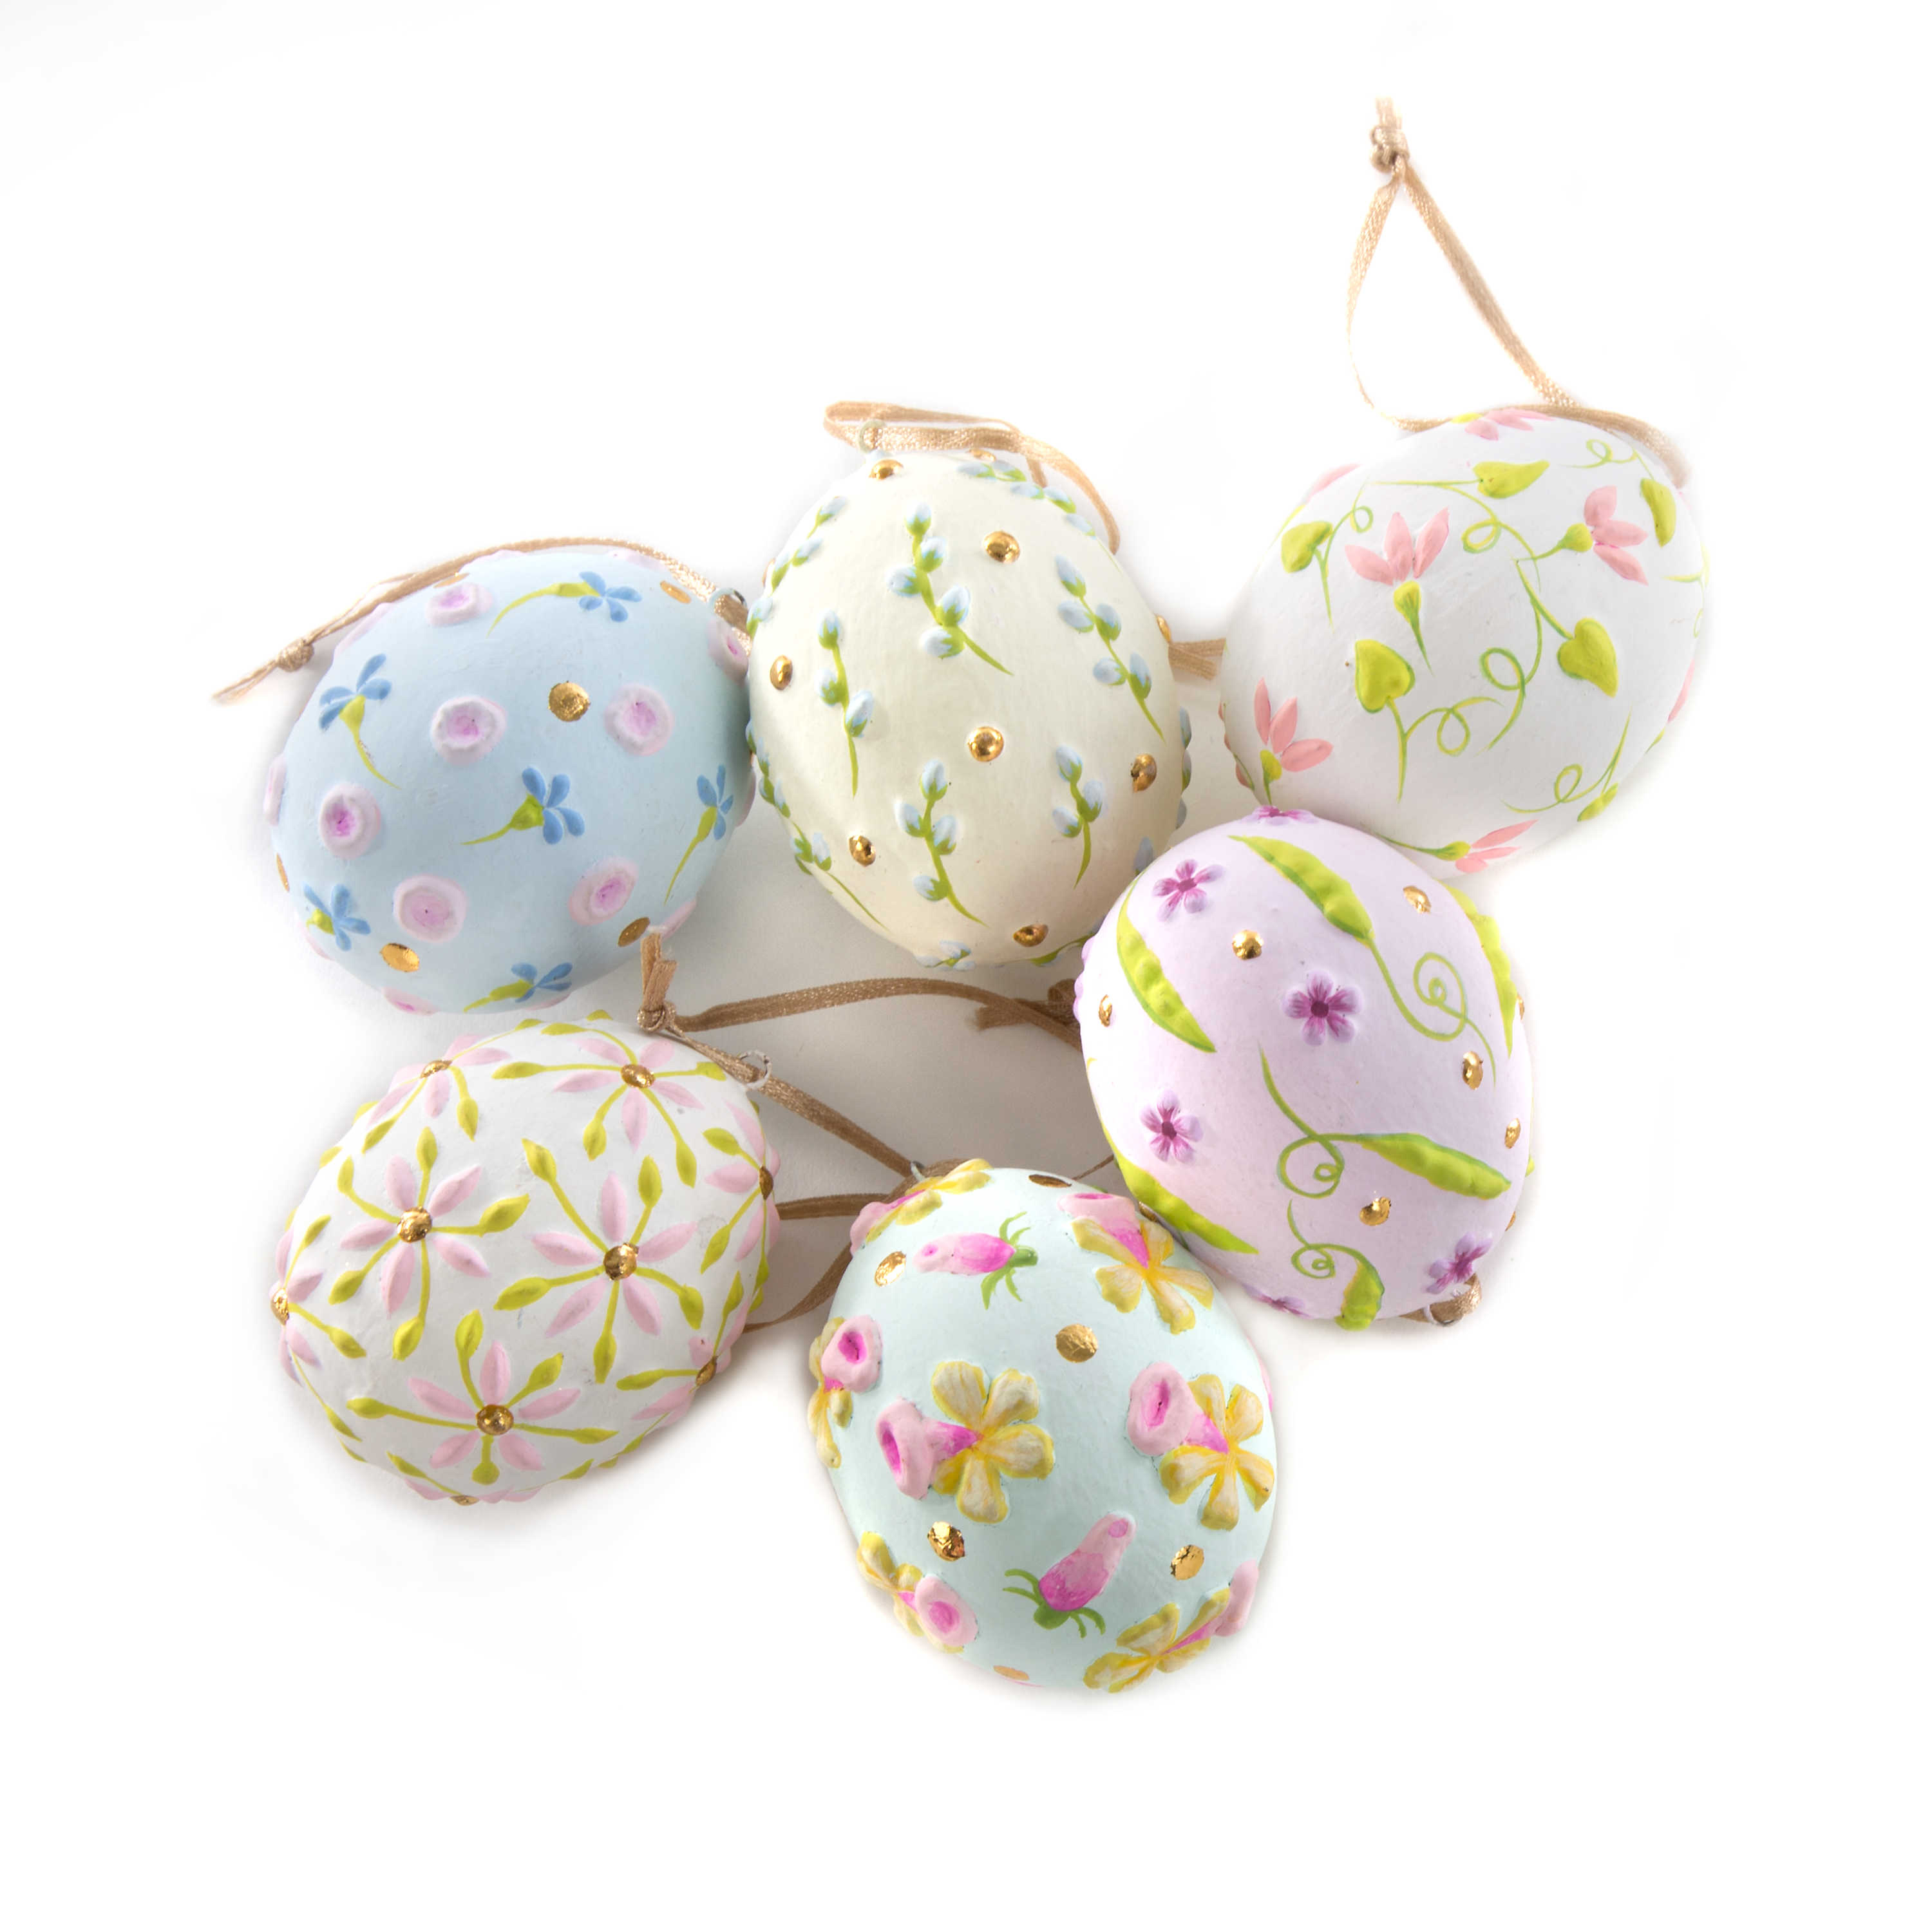 Patience Brewster Pastel Floral Eggs, Set of 6 mackenzie-childs Panama 0